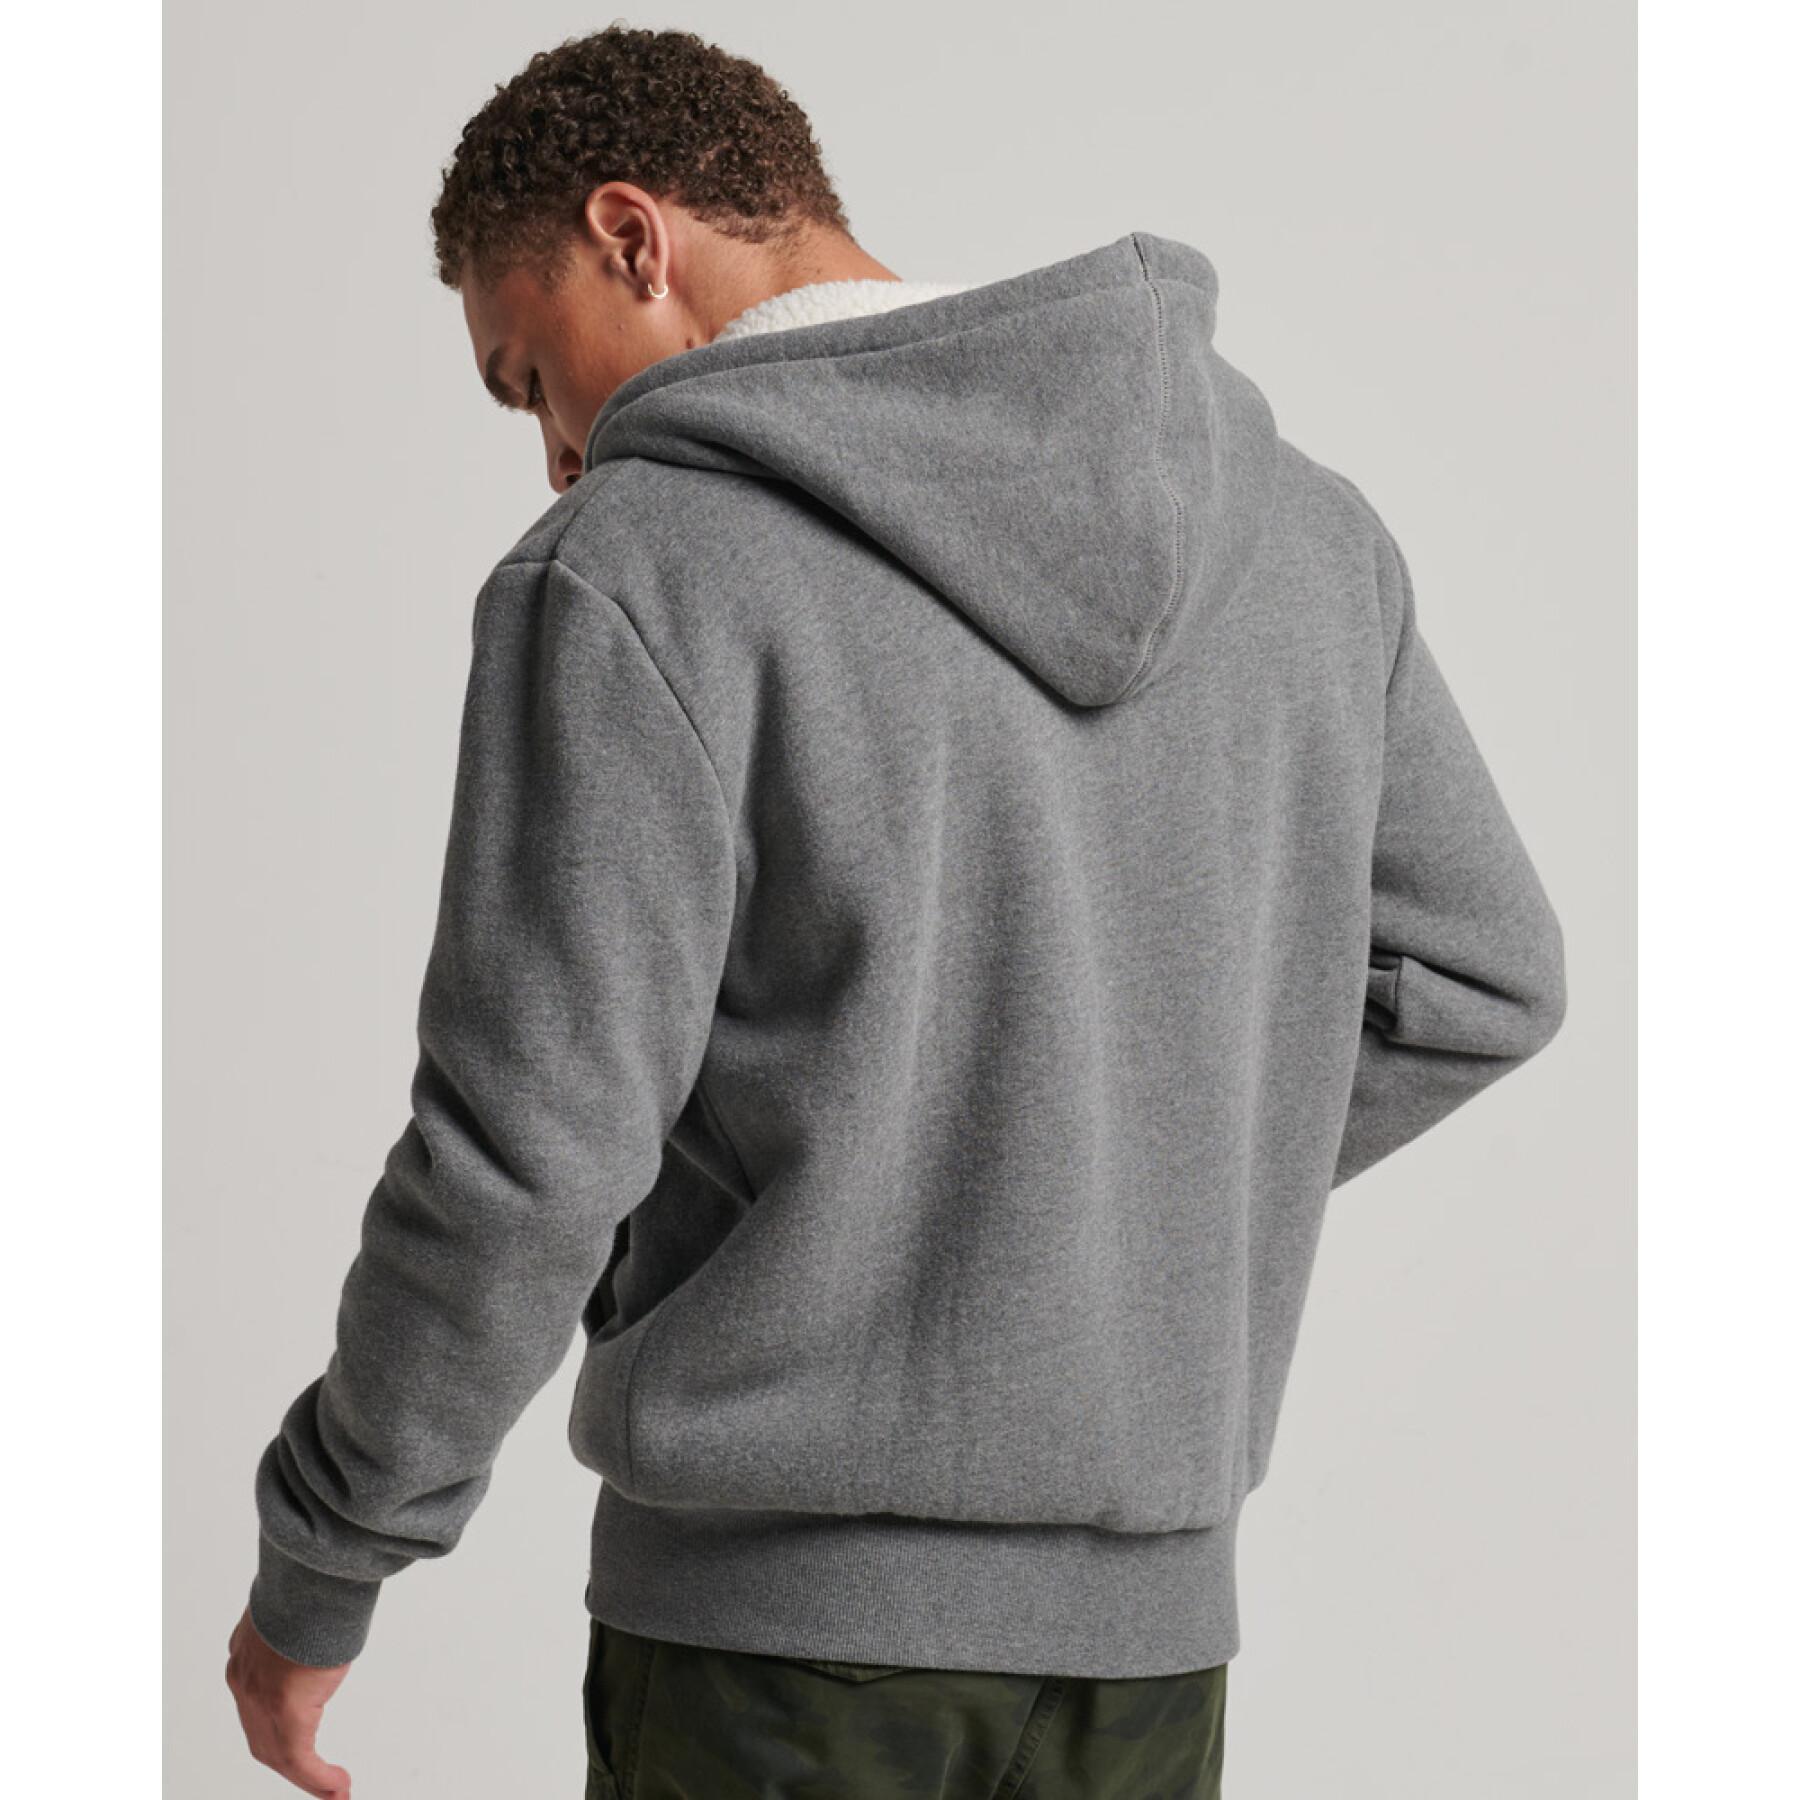 Hoodie with zipper and lined with wool skin Superdry